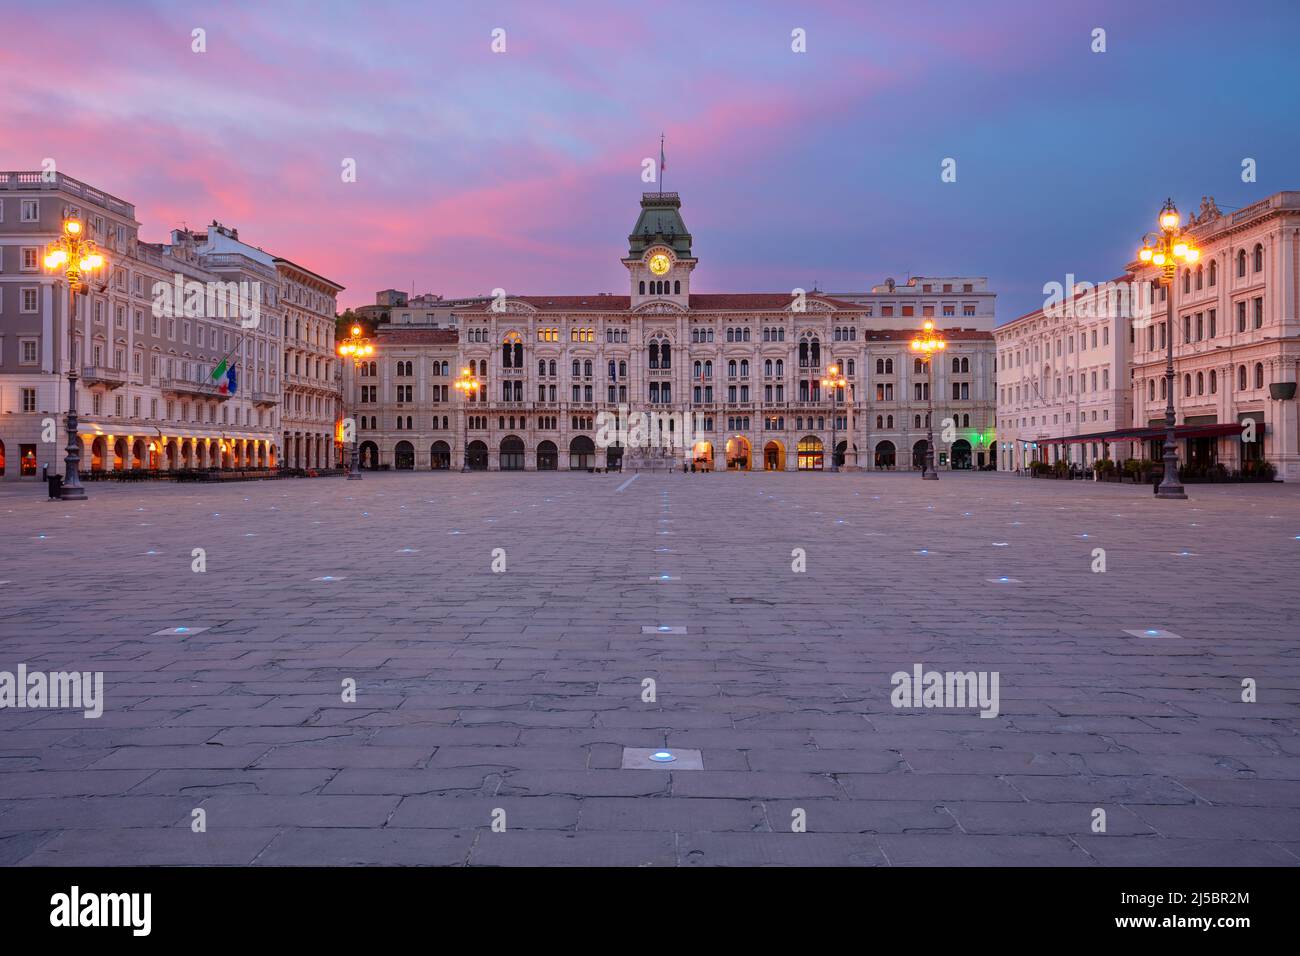 Trieste, Italy. Cityscape image of downtown Trieste, Italy with main square at dramatic sunrise. Stock Photo